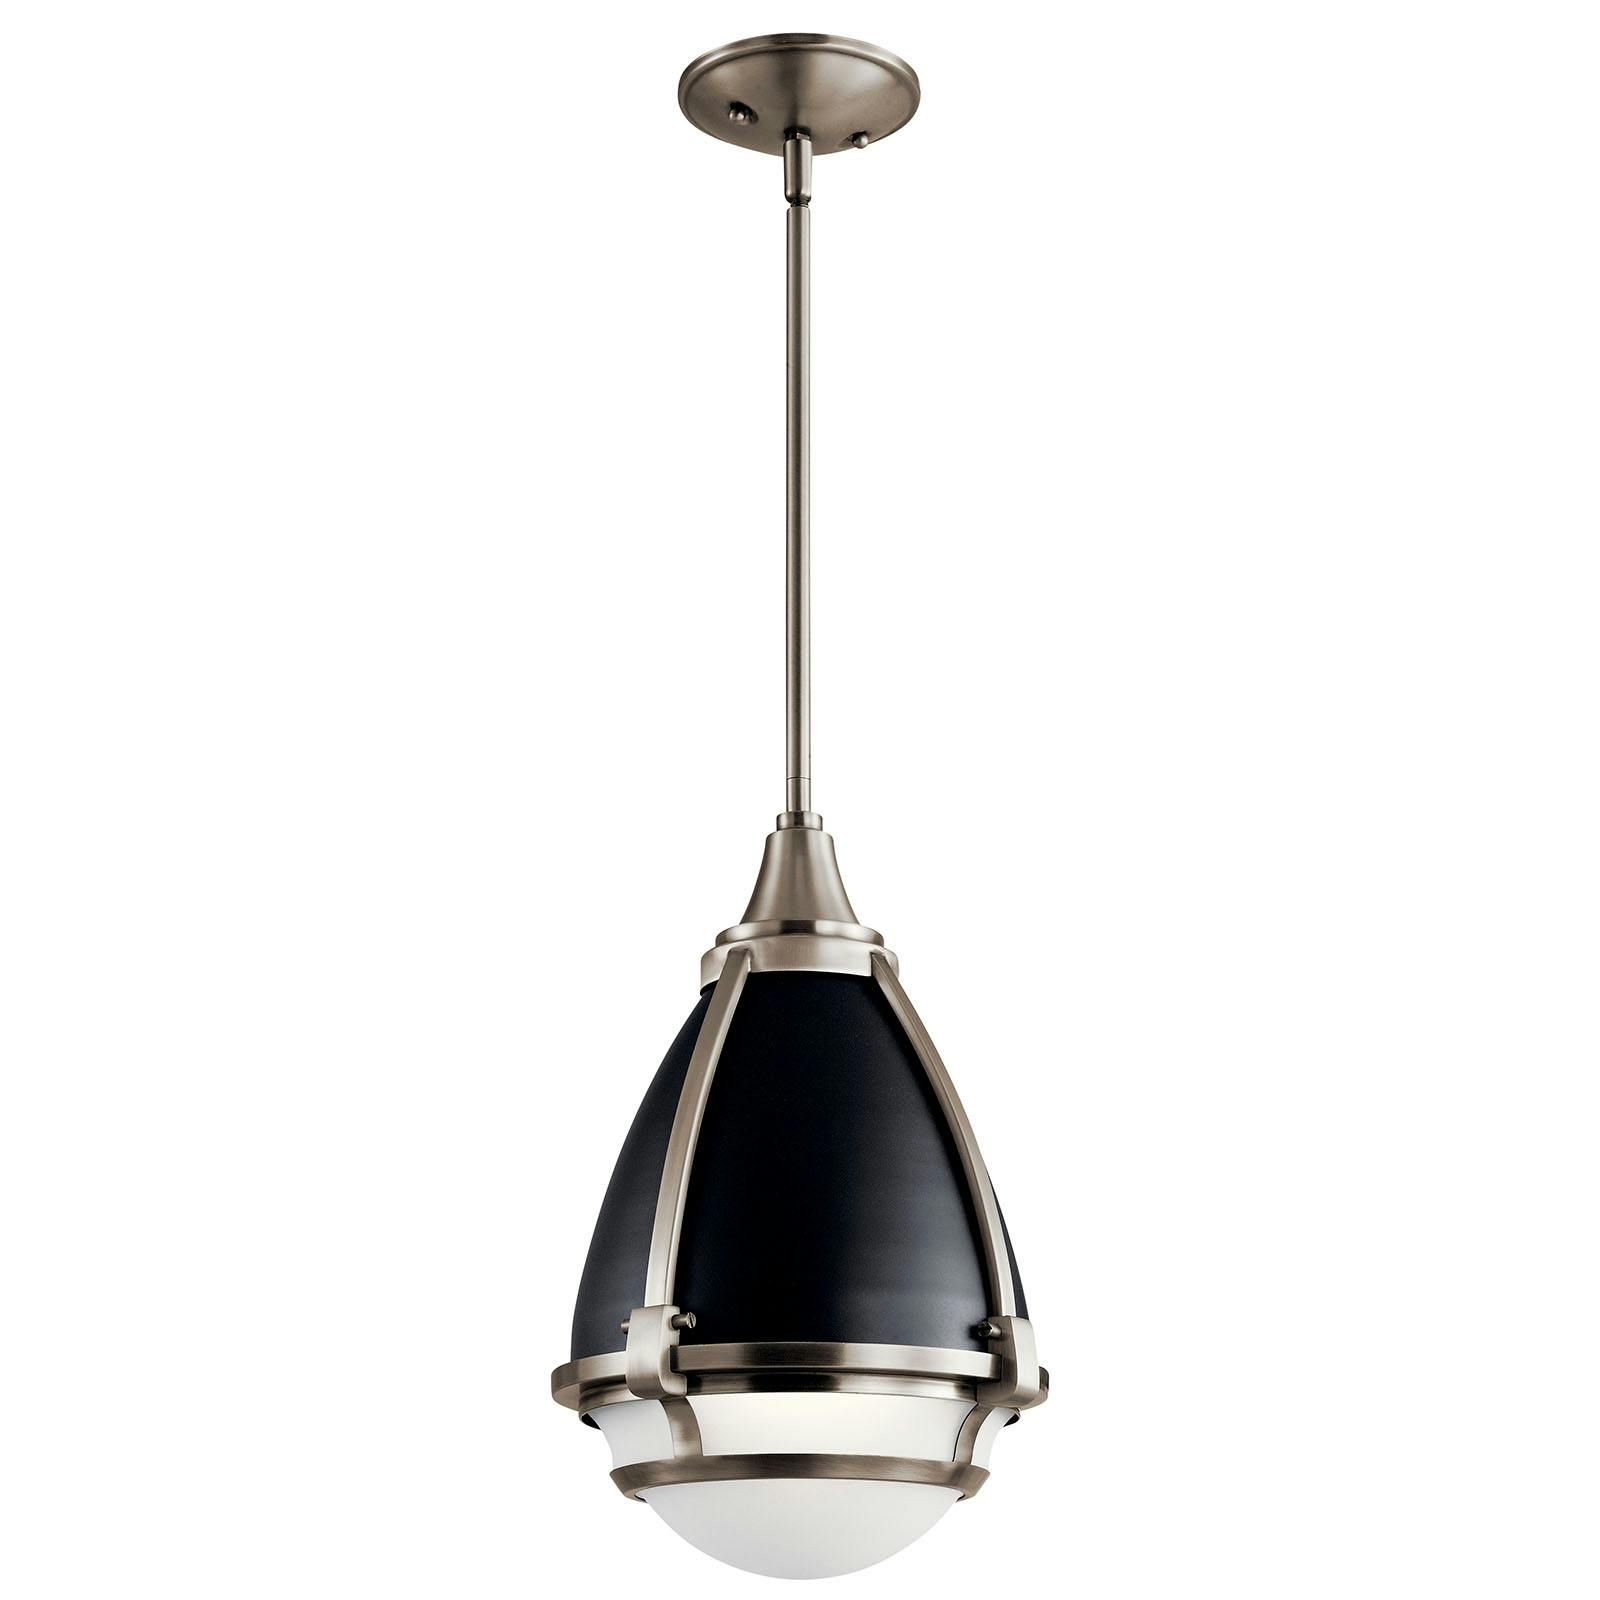 Ayra 1 Light Pendant Classic Pewter on a white background